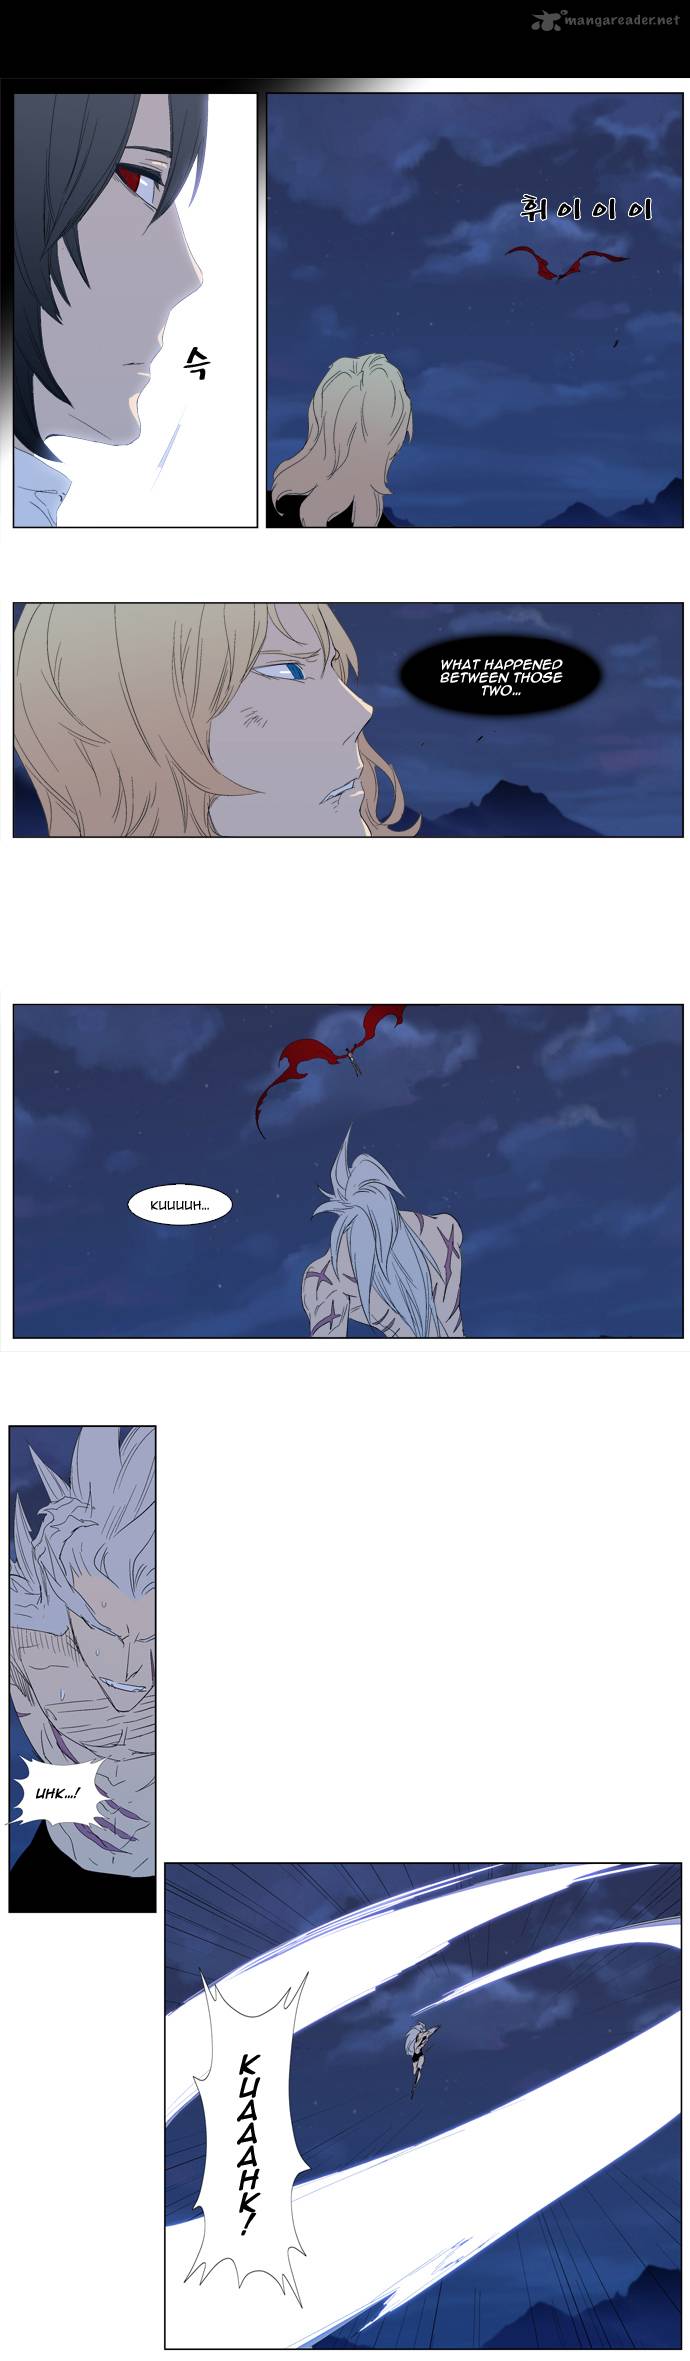 Noblesse Chapter 312 Page 5